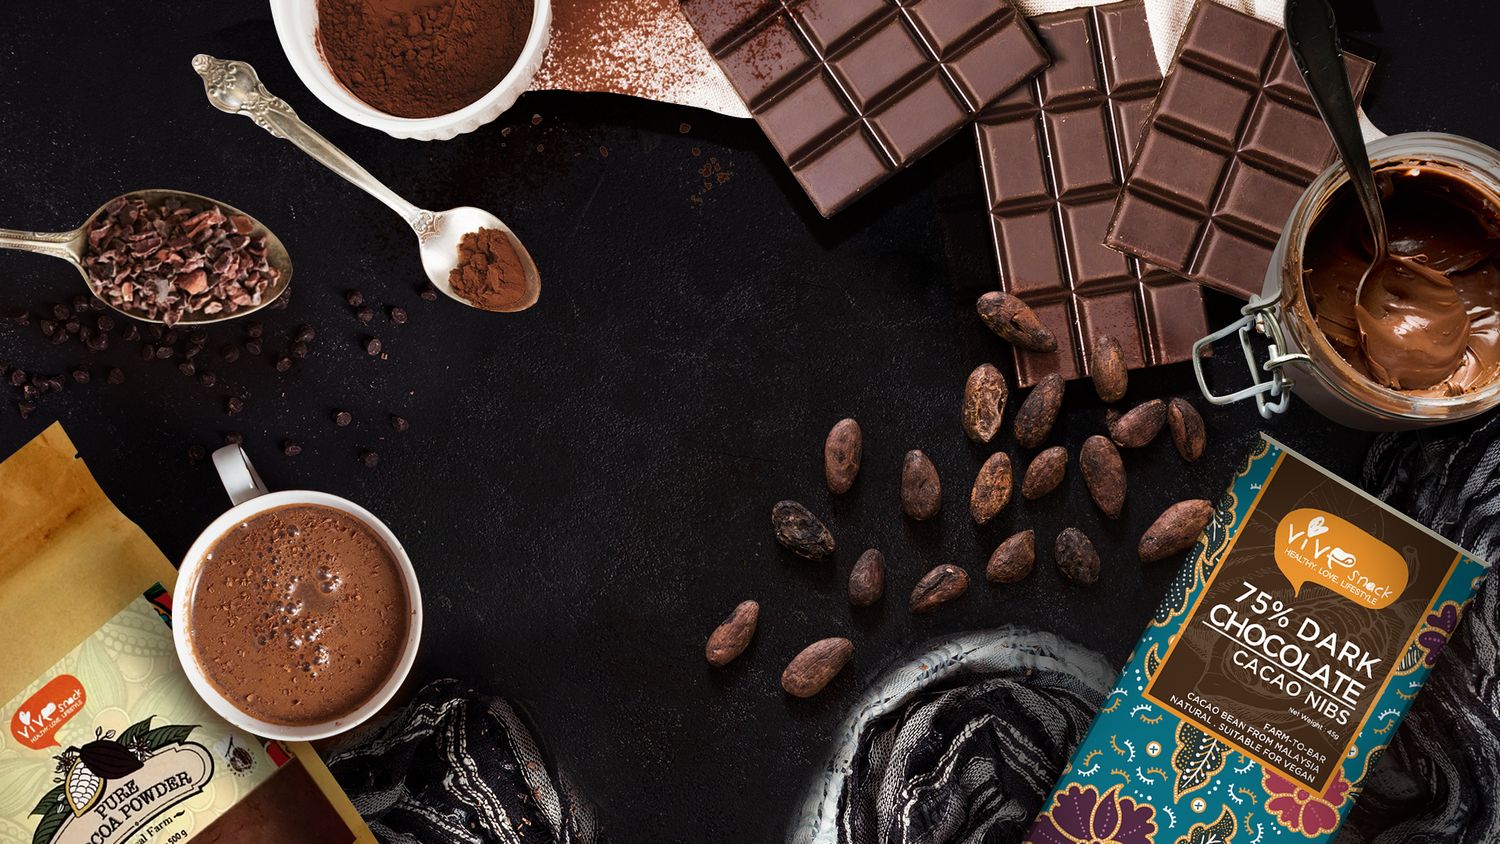 VIVE SNACK - Taste Real Malaysian Chocolate, Handcrafted Locally! | Artisan Chocolate